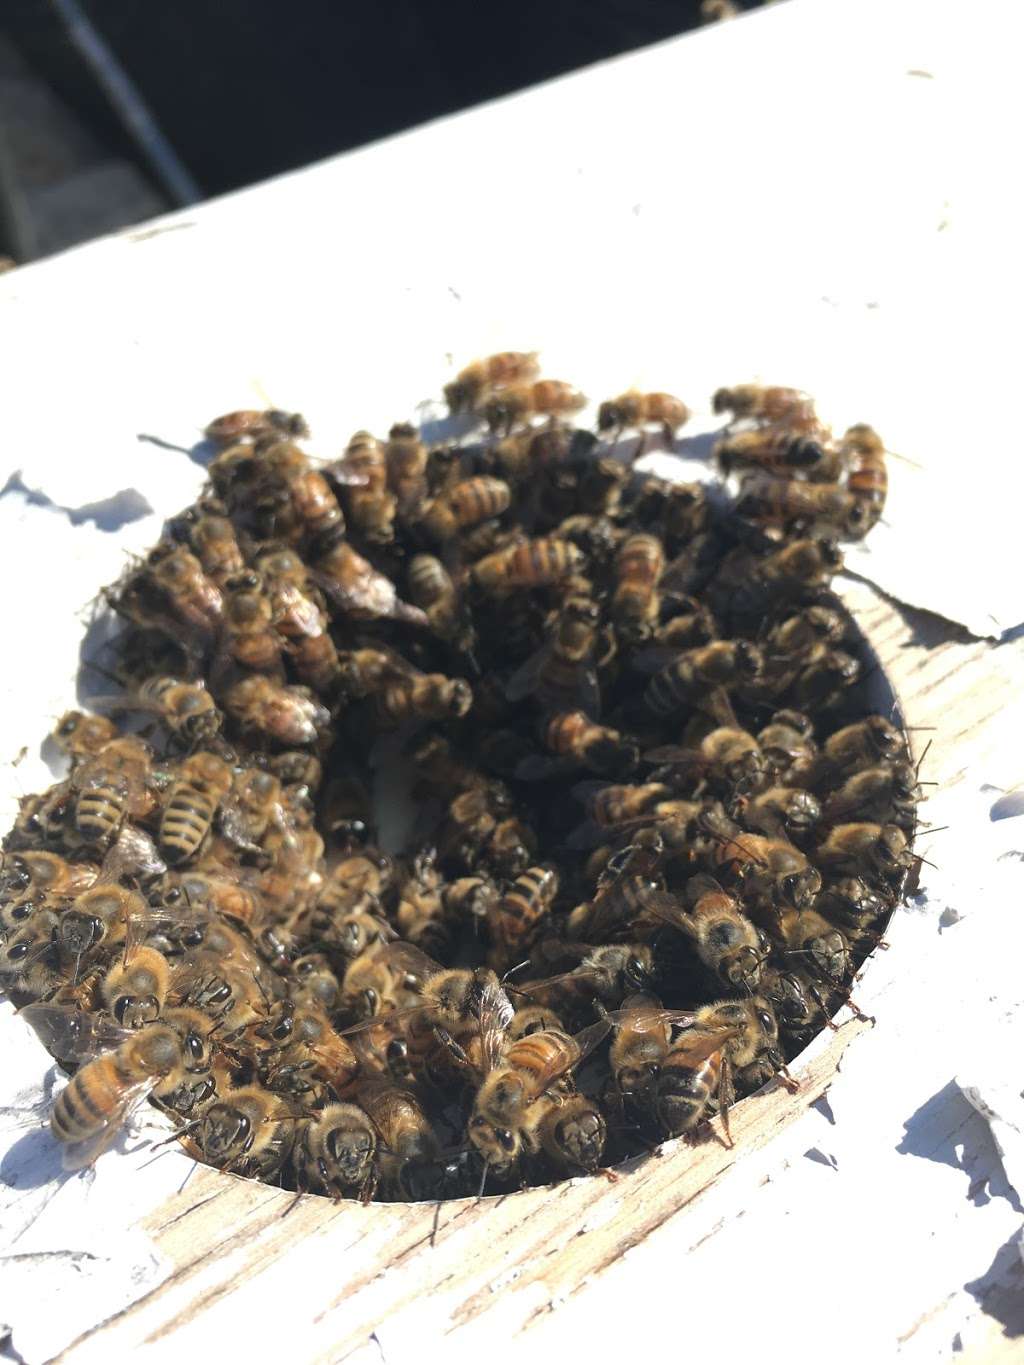 QueenB Live Bee Removal | 4327, 301 Sweetwood St, San Diego, CA 92114 | Phone: (619) 674-2841